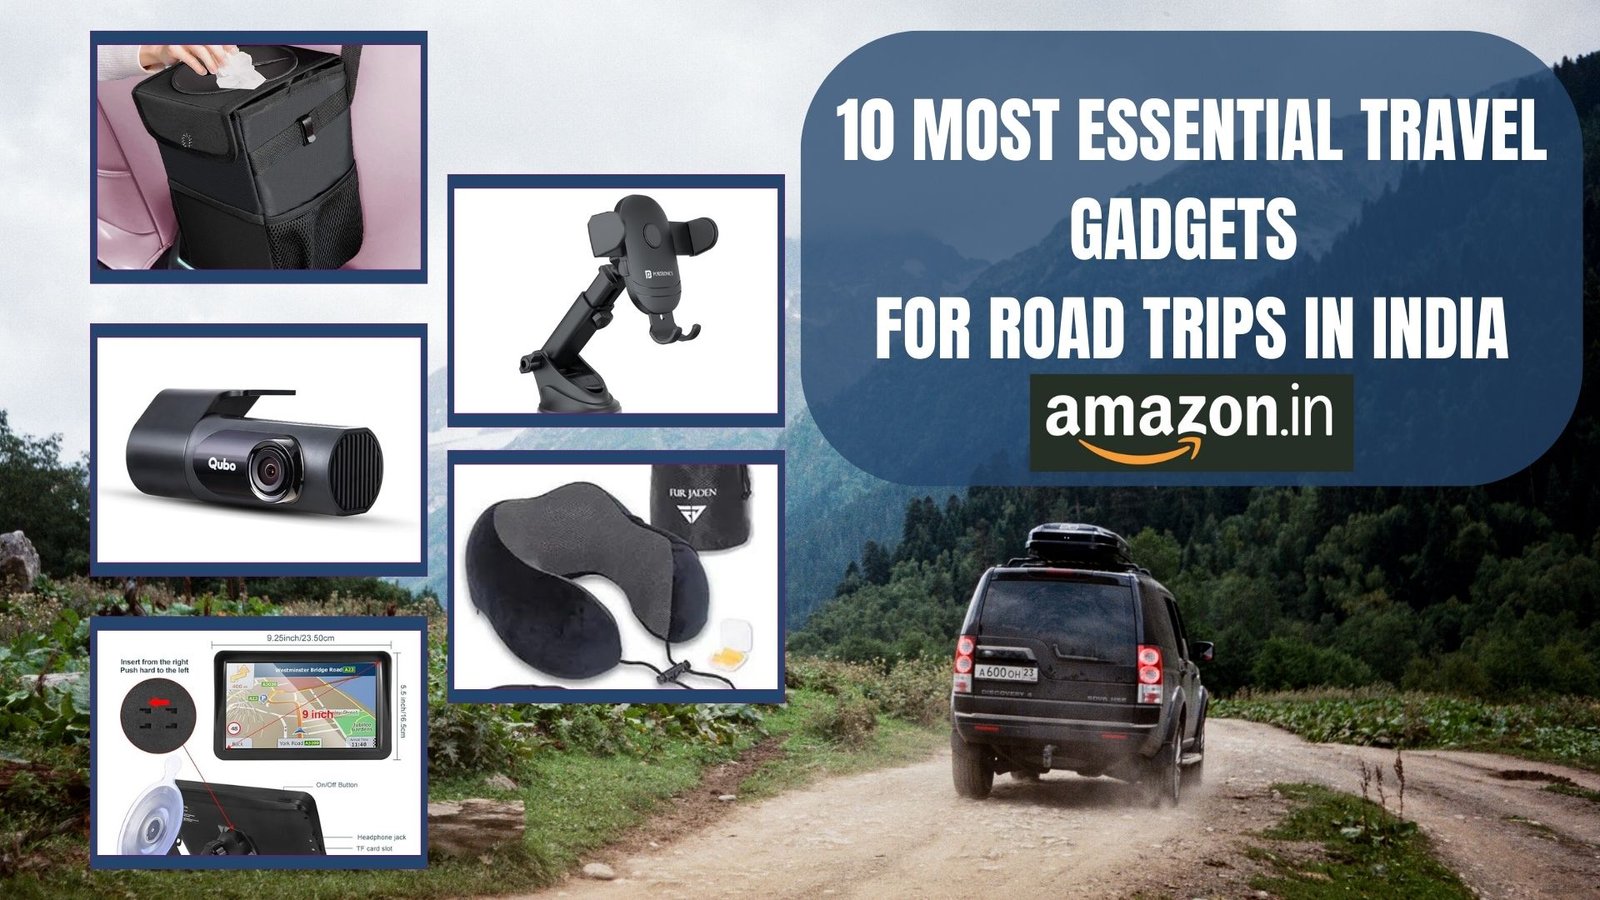 Essential Travel Gadgets For Road Trips in India on Amazon